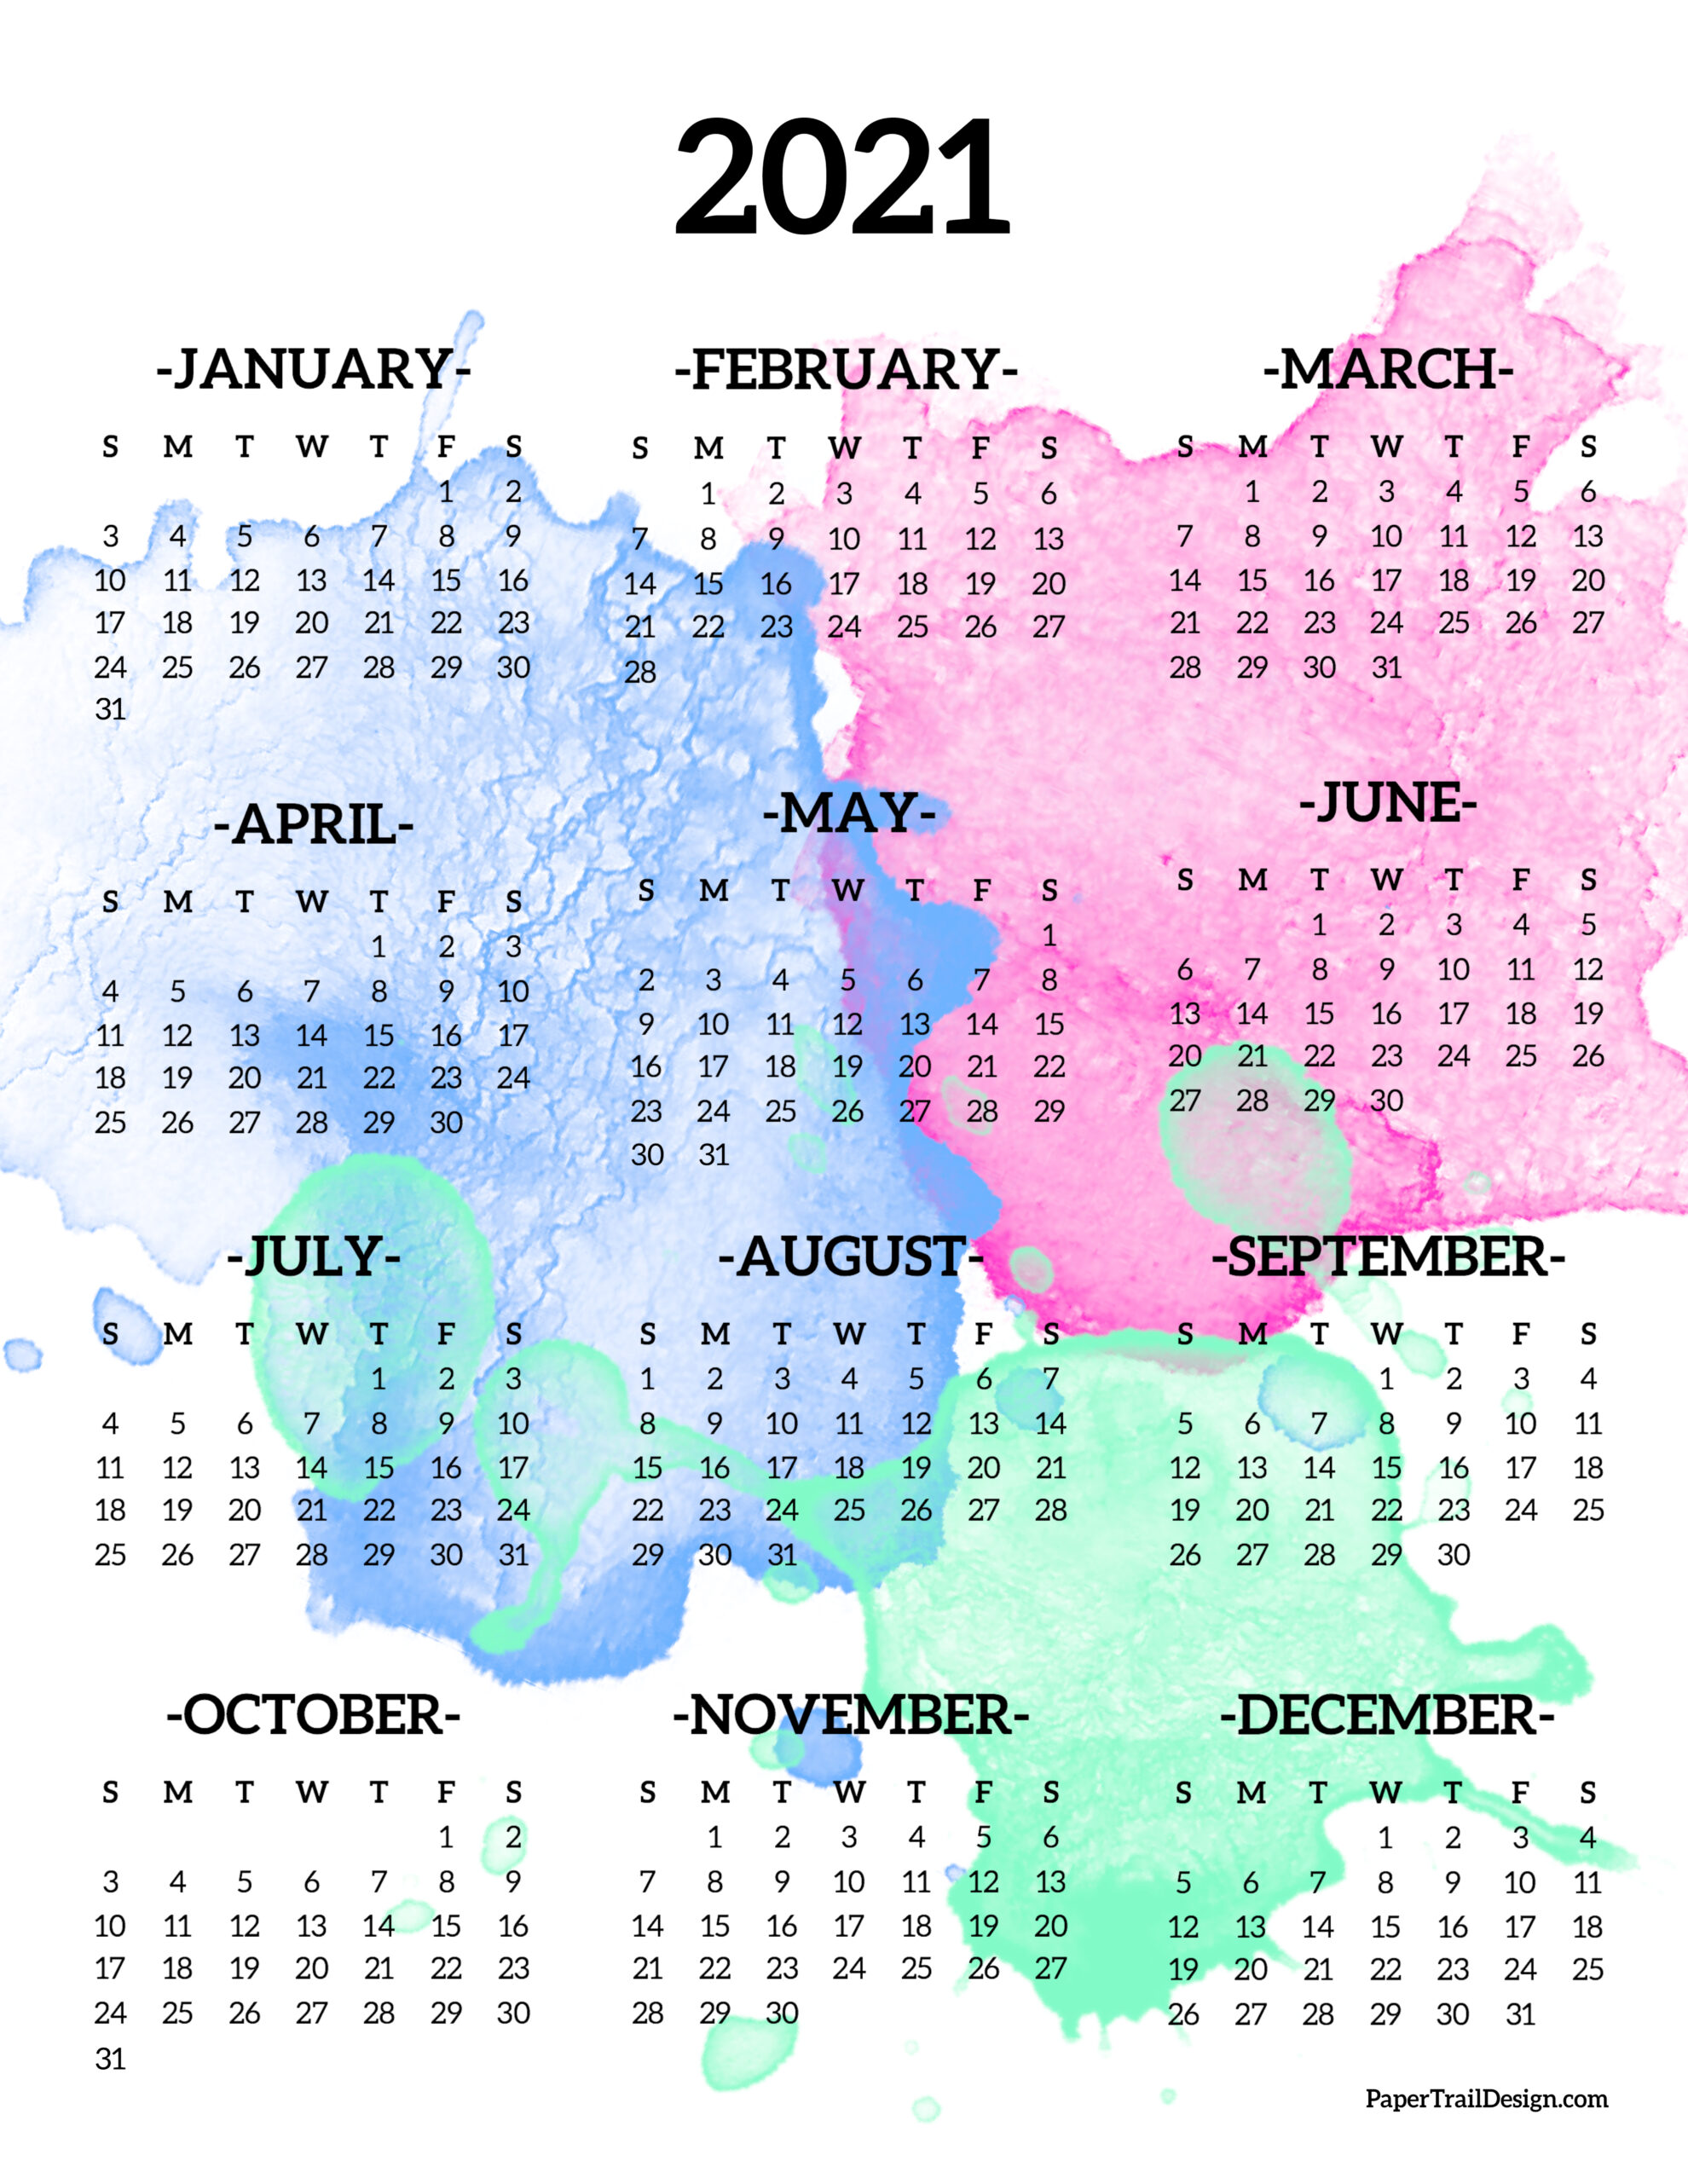 calendar-2021-printable-one-page-paper-trail-design